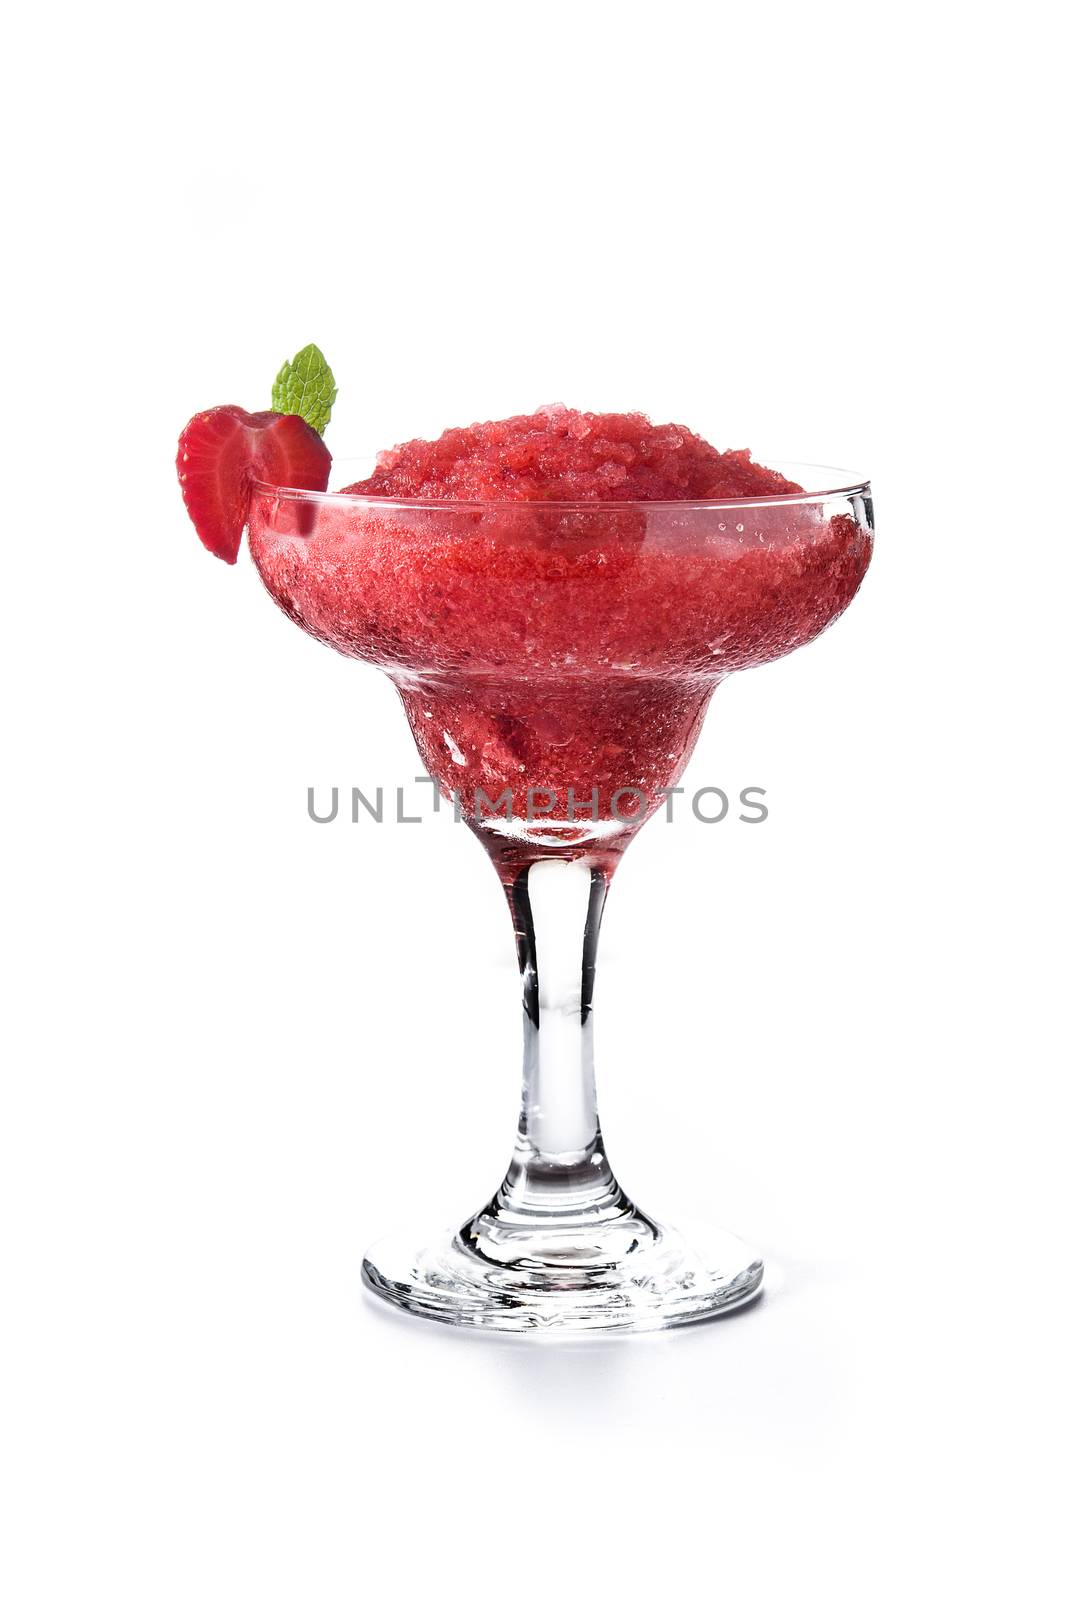 Strawberry margarita cocktail isolated on white background